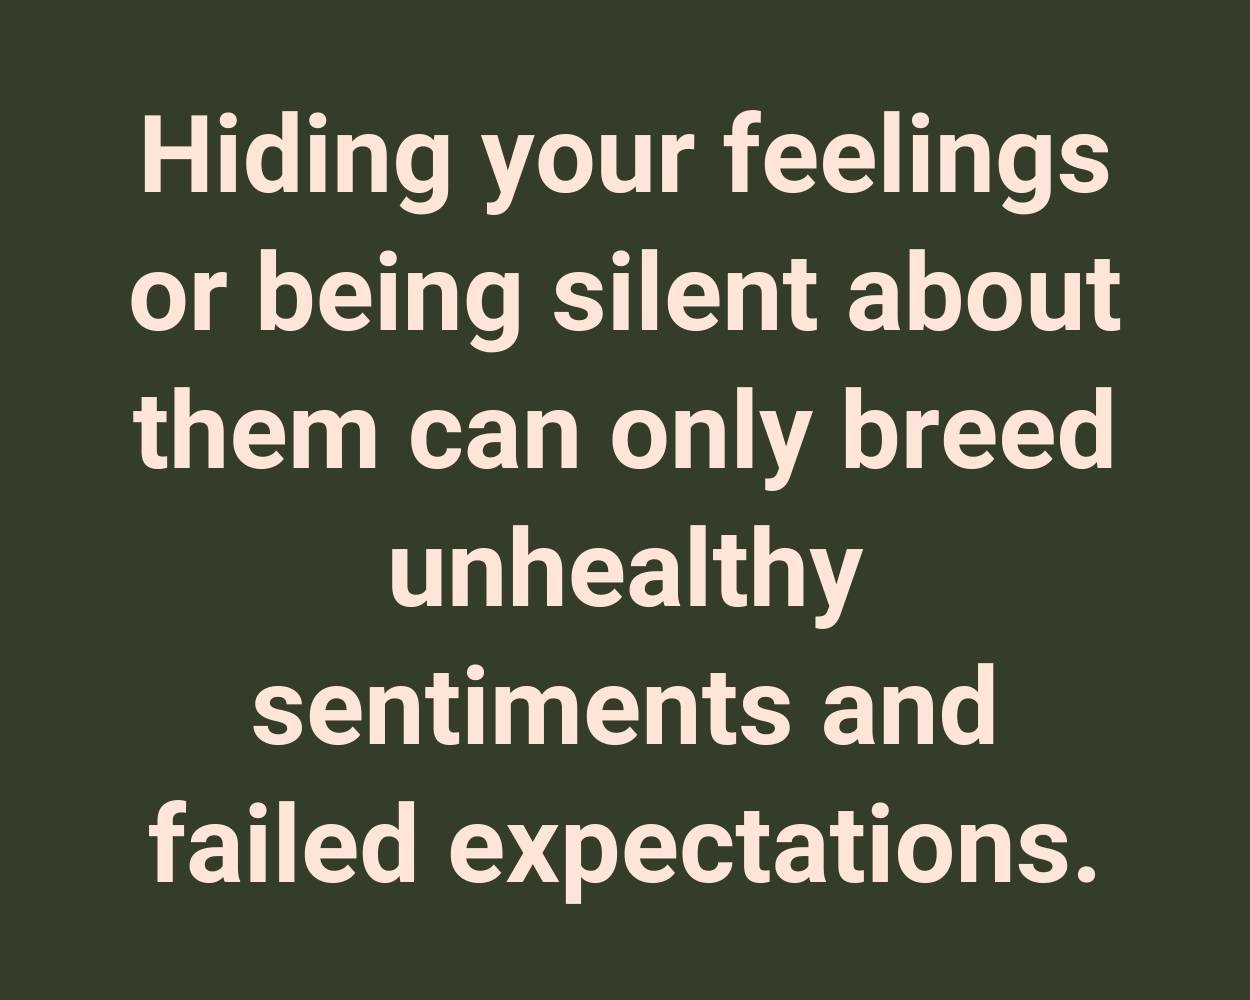 Hiding your feelings or being silent about them can only breed unhealthy sentiments and failed expectations.